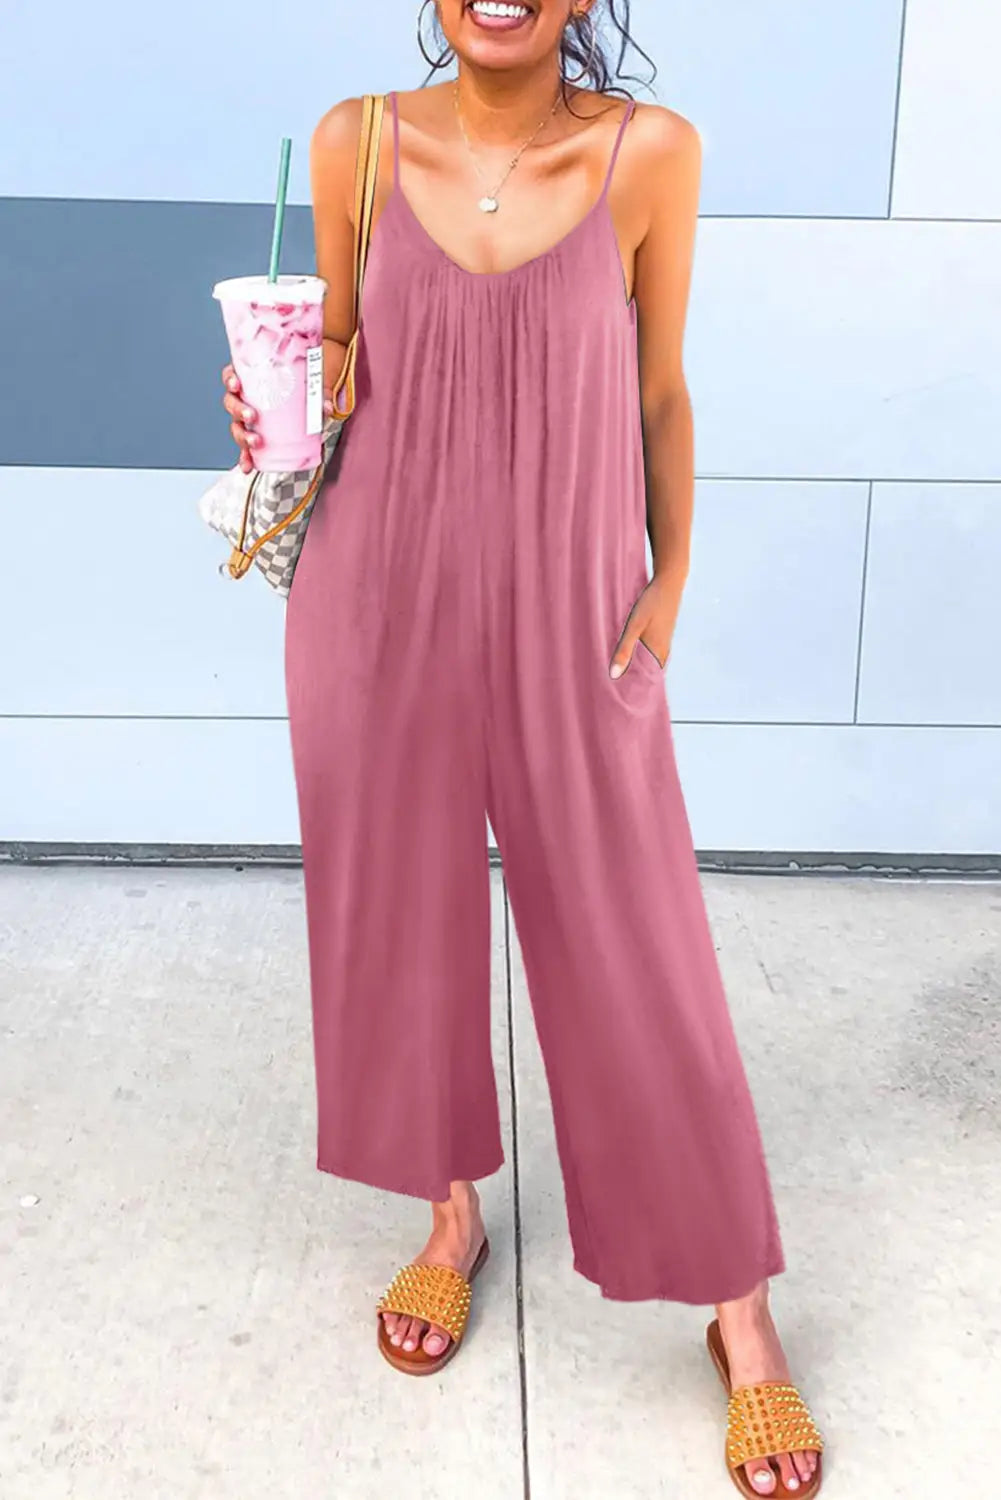 Pink red spaghetti straps wide leg pocketed jumpsuits - & rompers